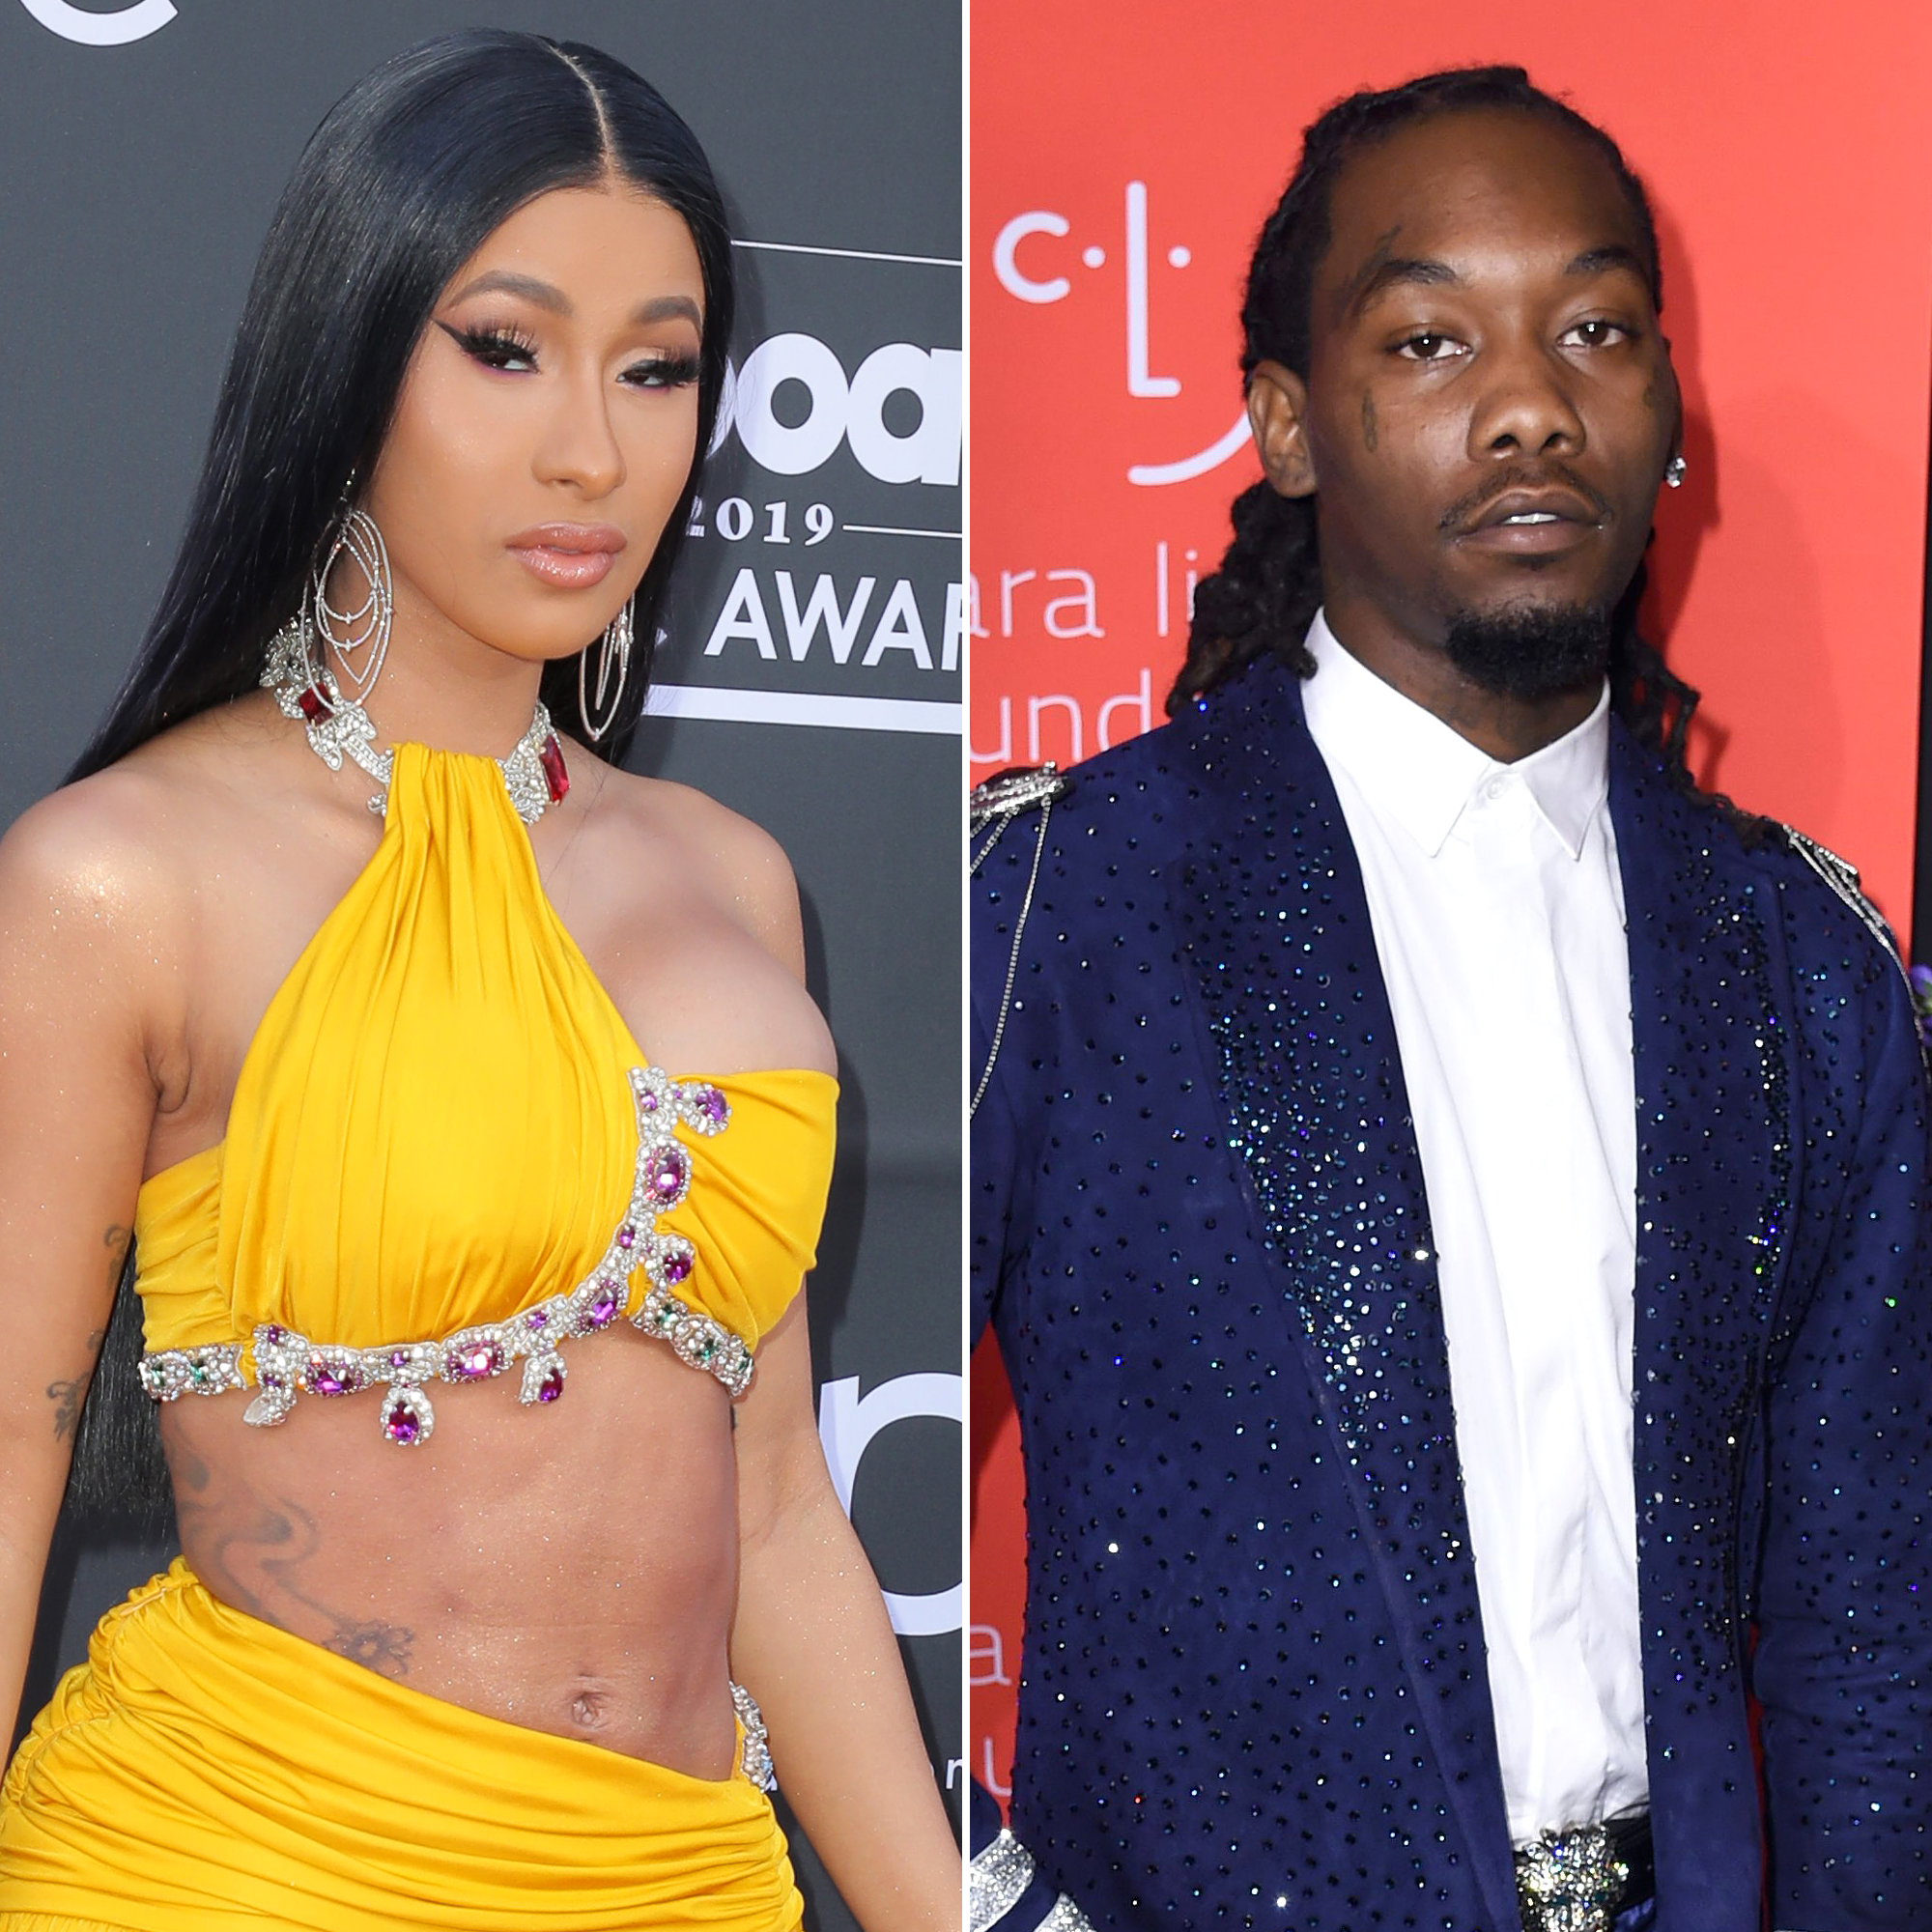 Offset Hacked: Cardi B Reacts After Tekashi69's Girlfriend's